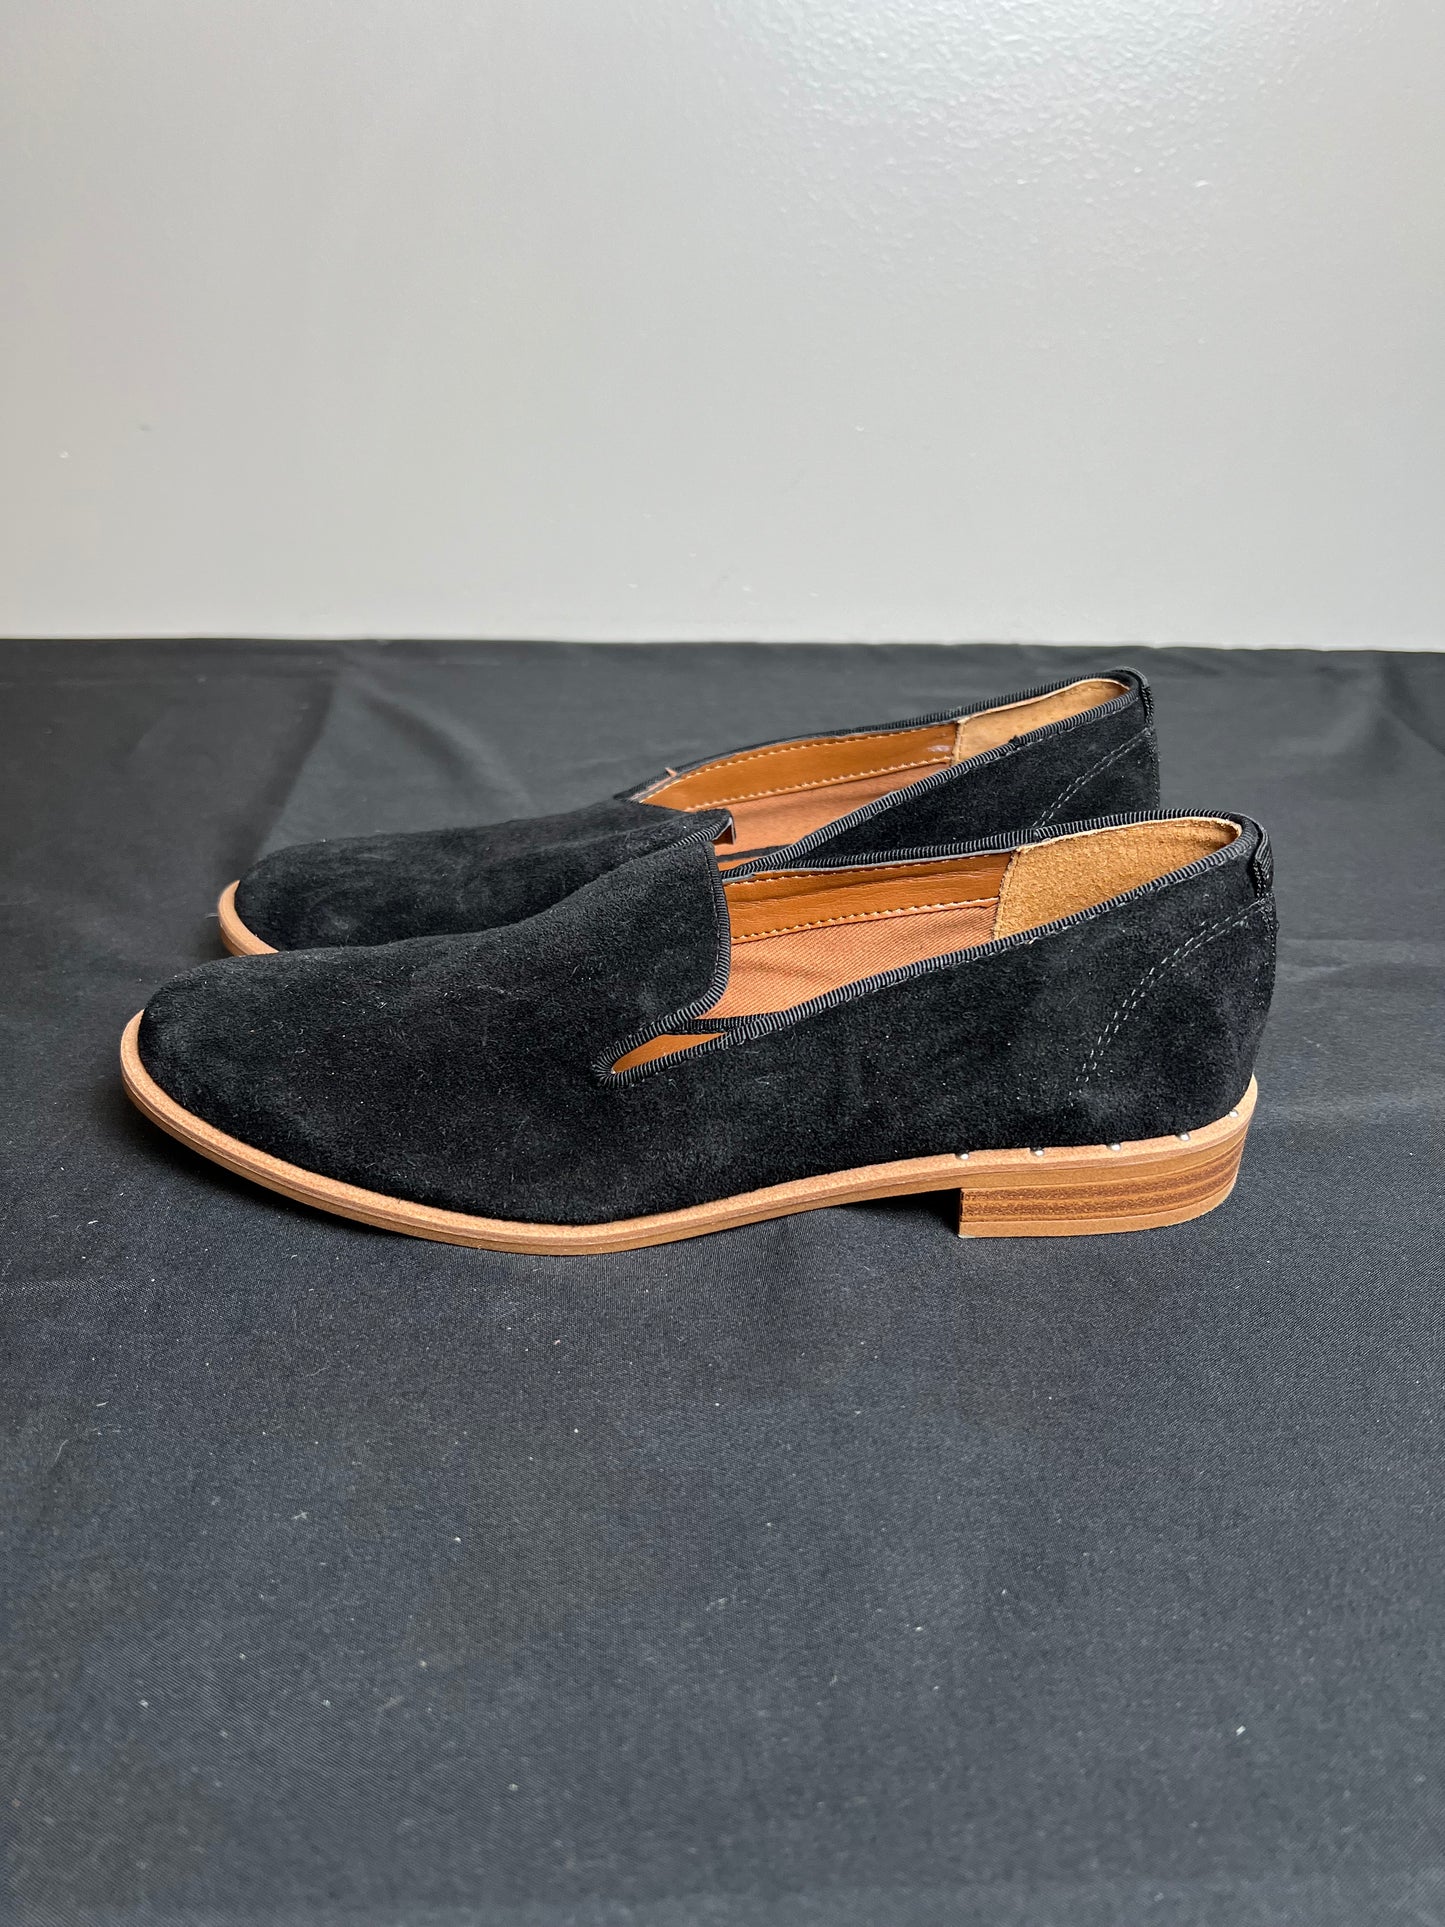 Shoes Flats Loafer Oxford By Franco Sarto  Size: 6.5